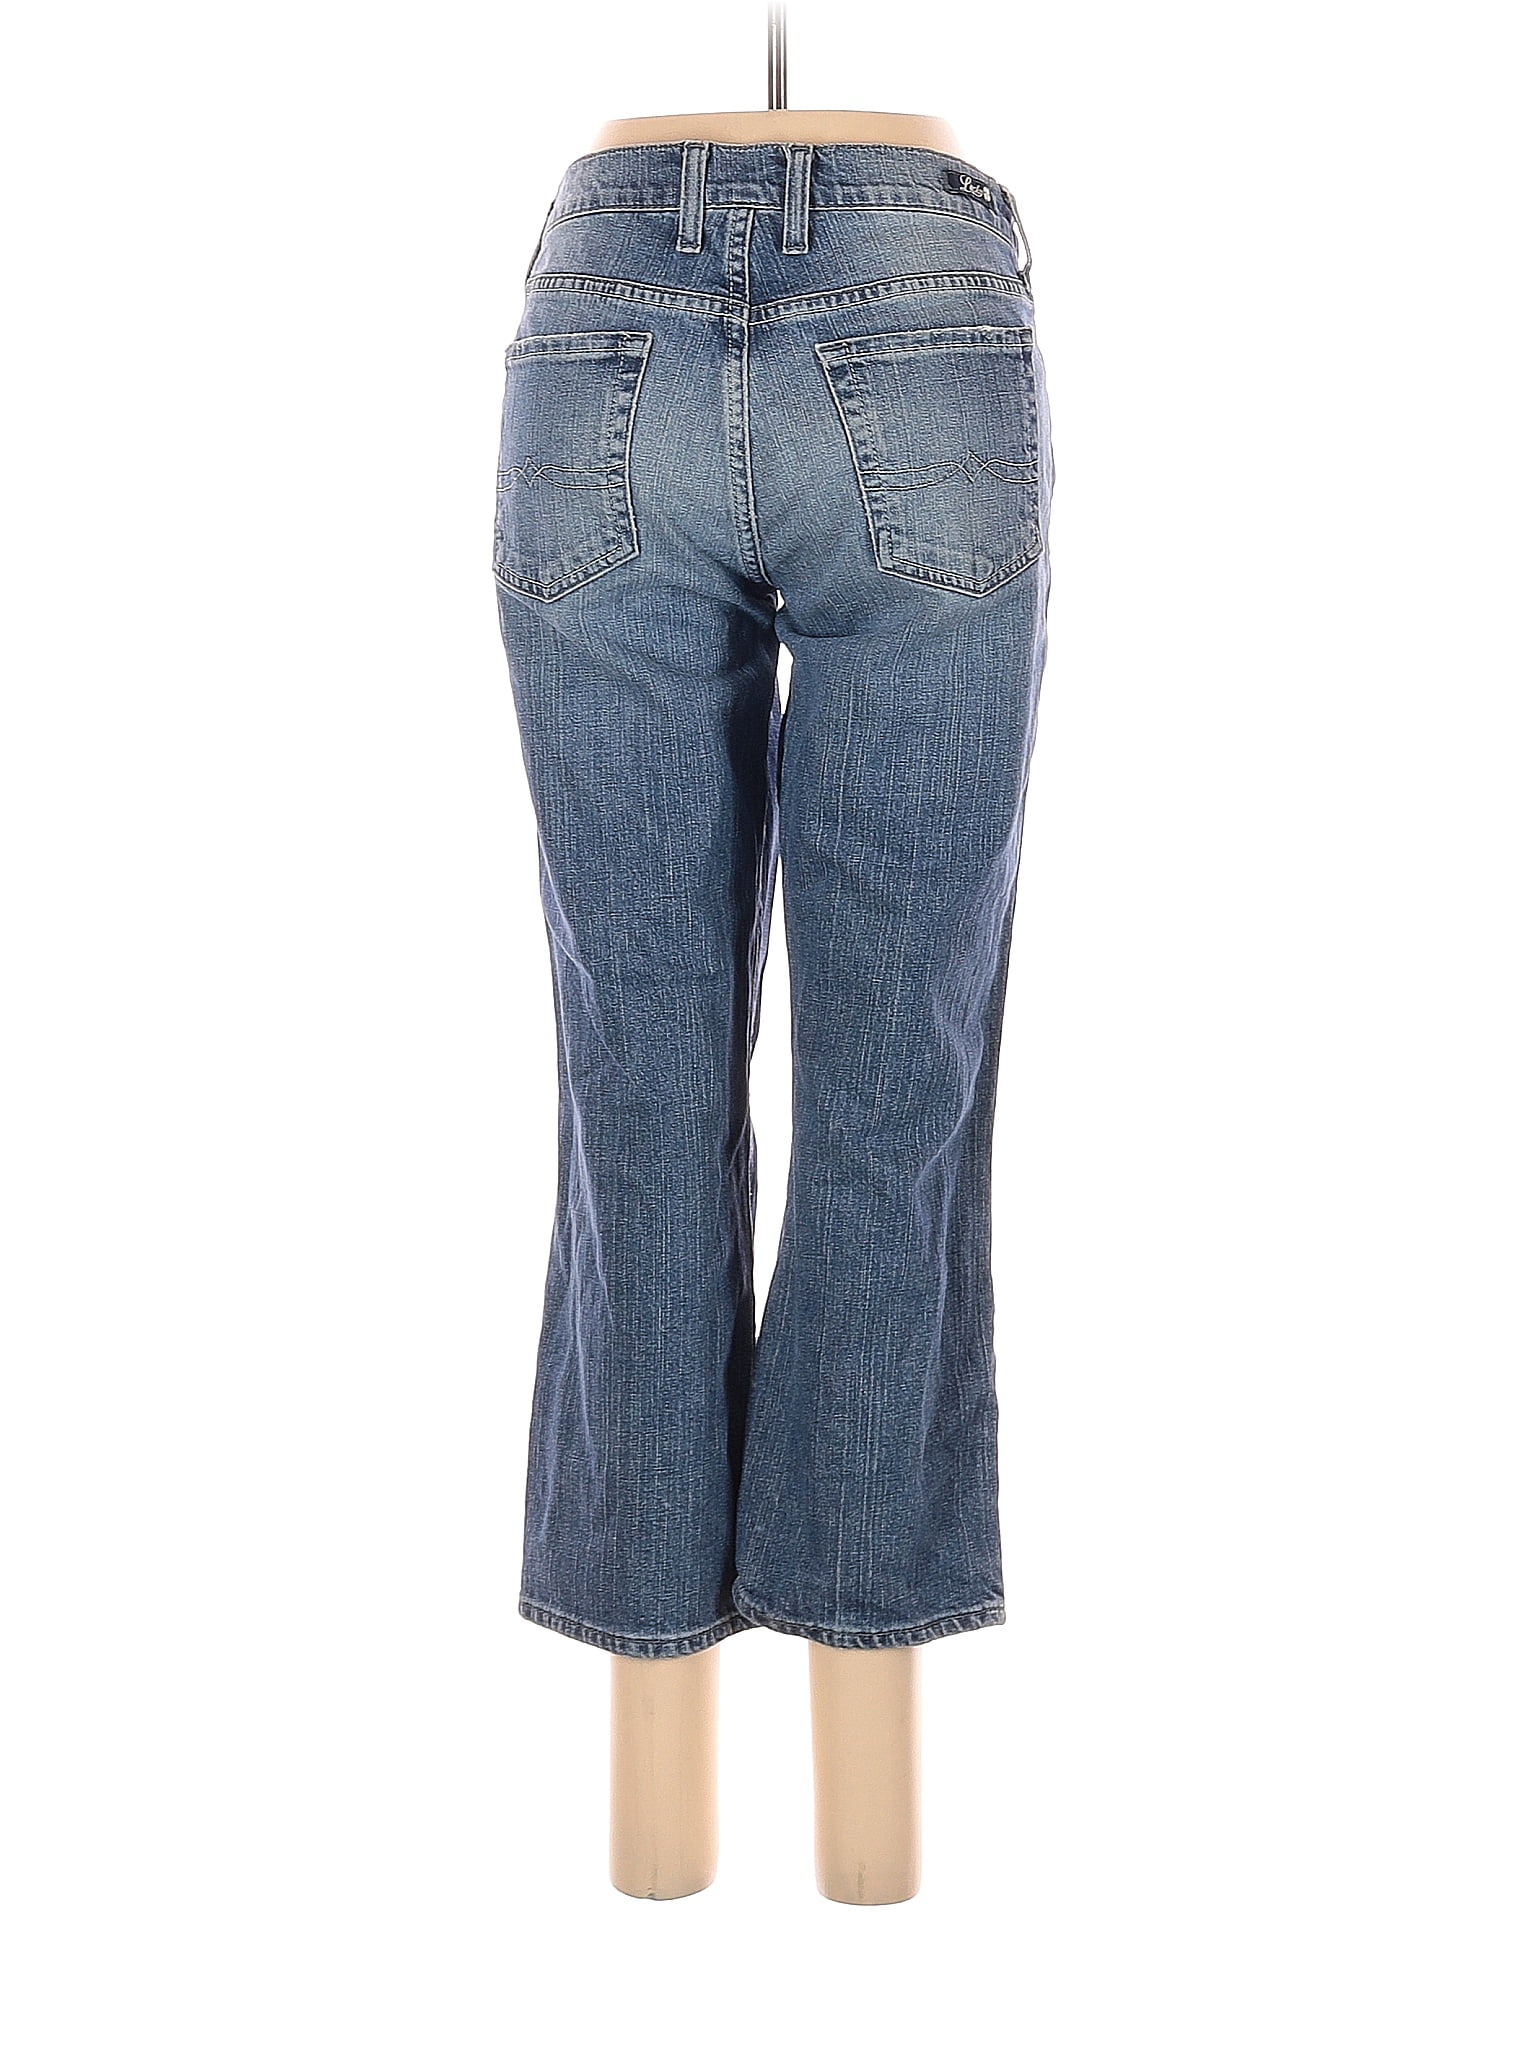 Lucky Brand 156 Peanut Pant Gene Montesano Lower Rise Flare 8/29 30 Waist  40 Hips 9 Front Rise Lucky Brand Dungarees -  New Zealand